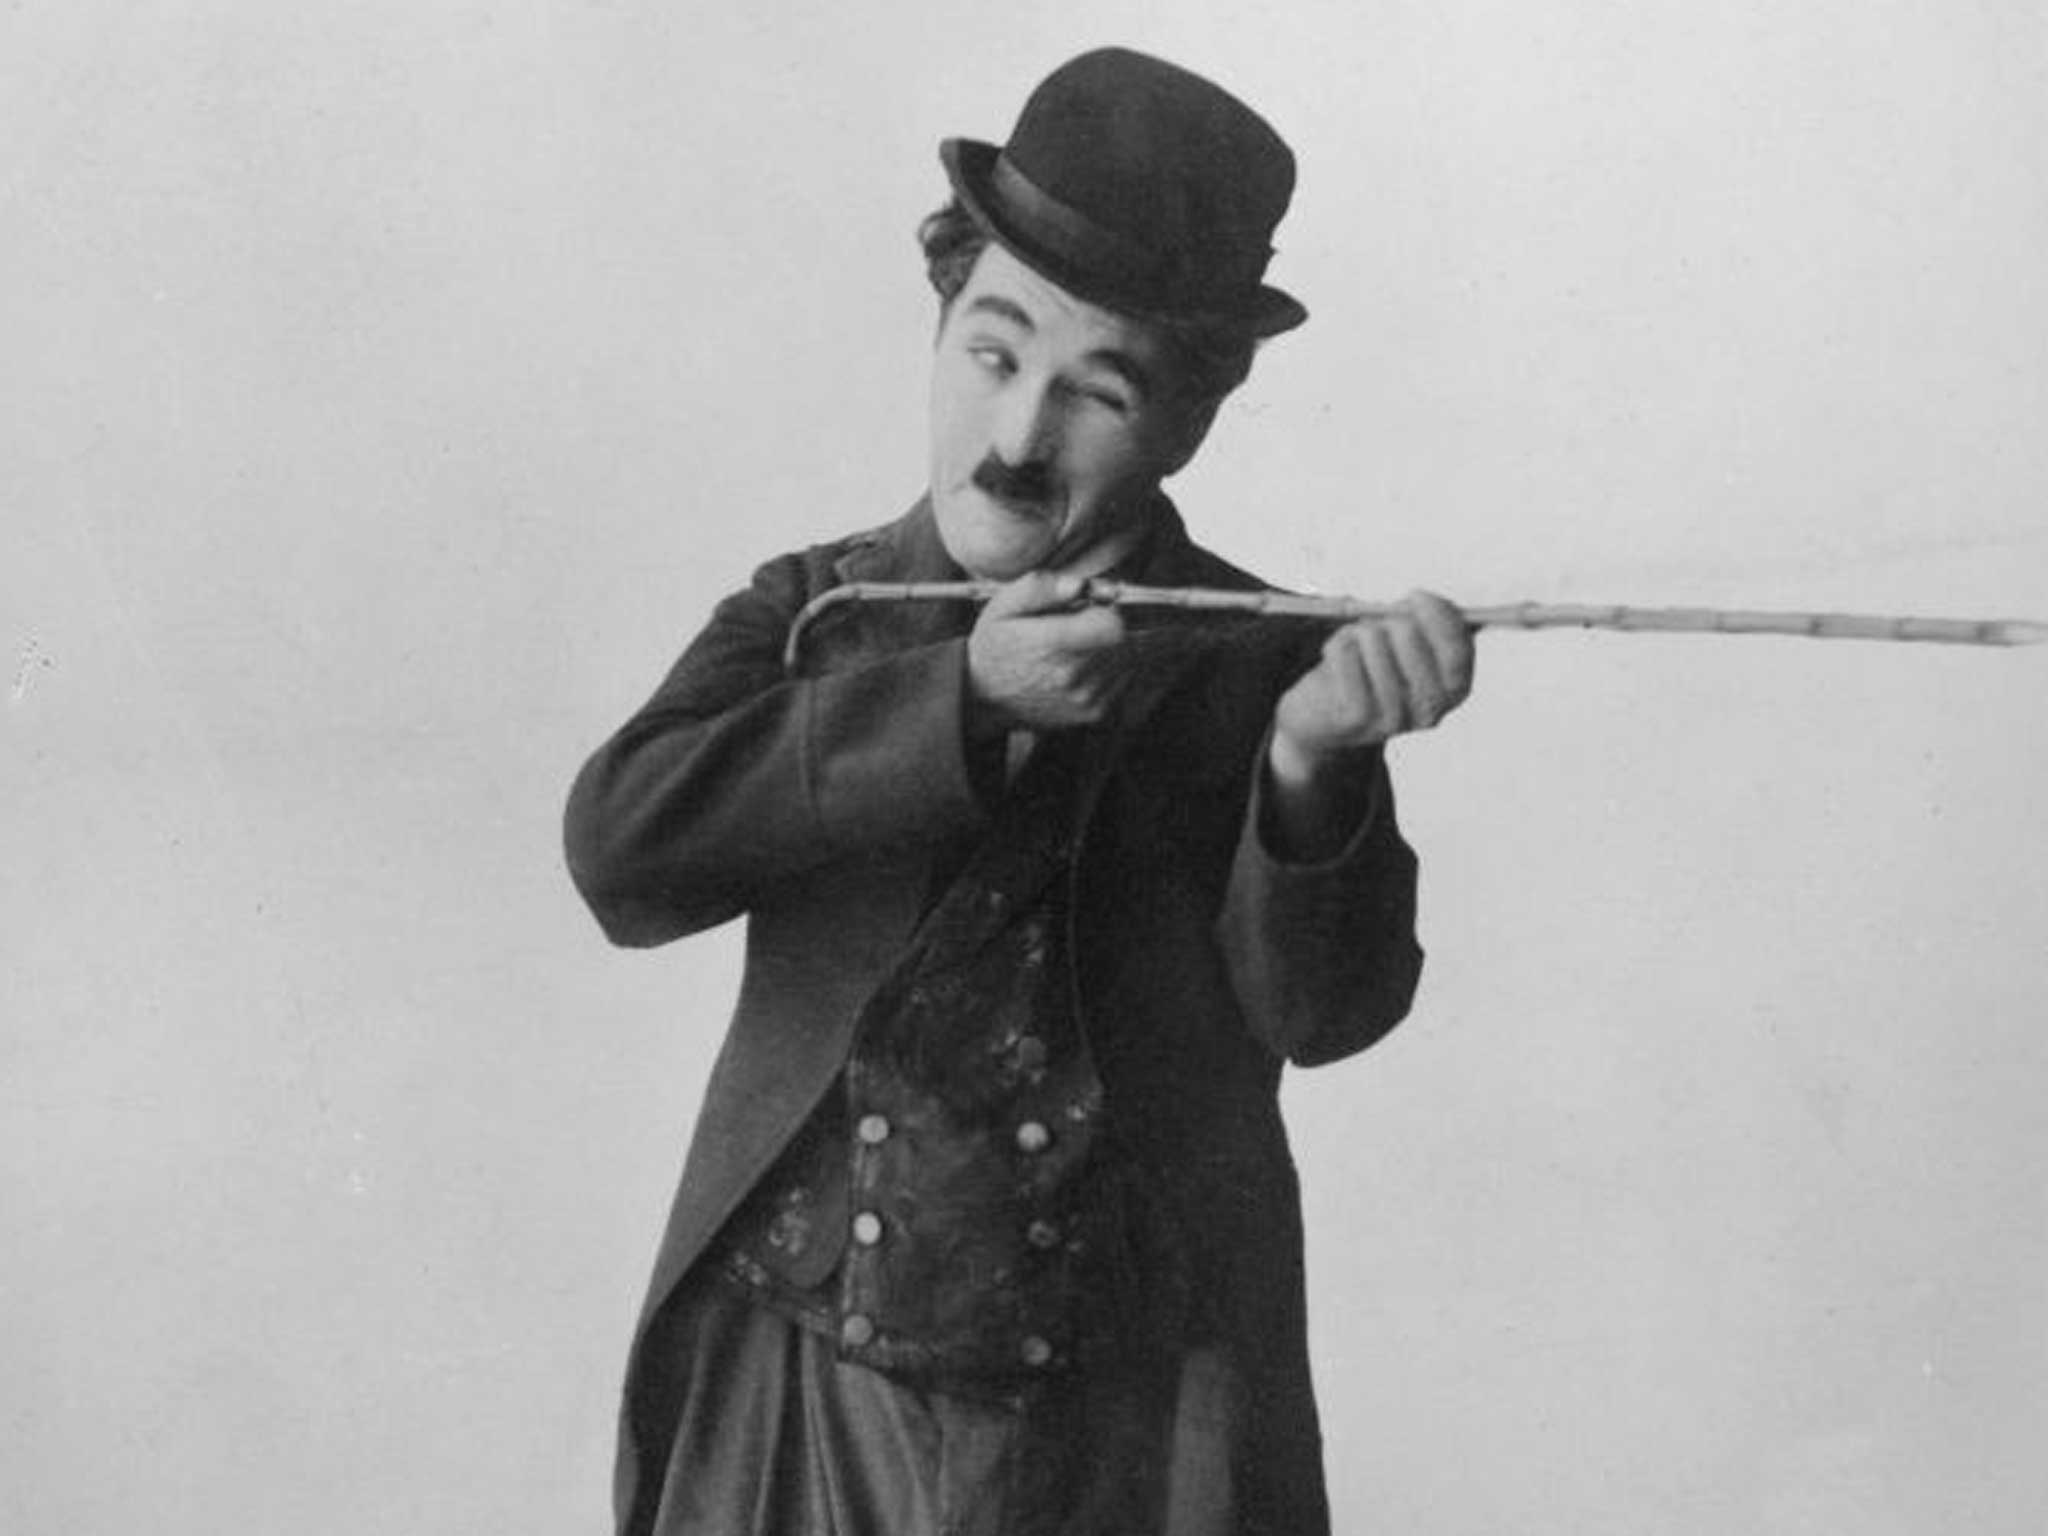 The UK's first Museum of omedy will house articles such as Charlie Chaplin's cane